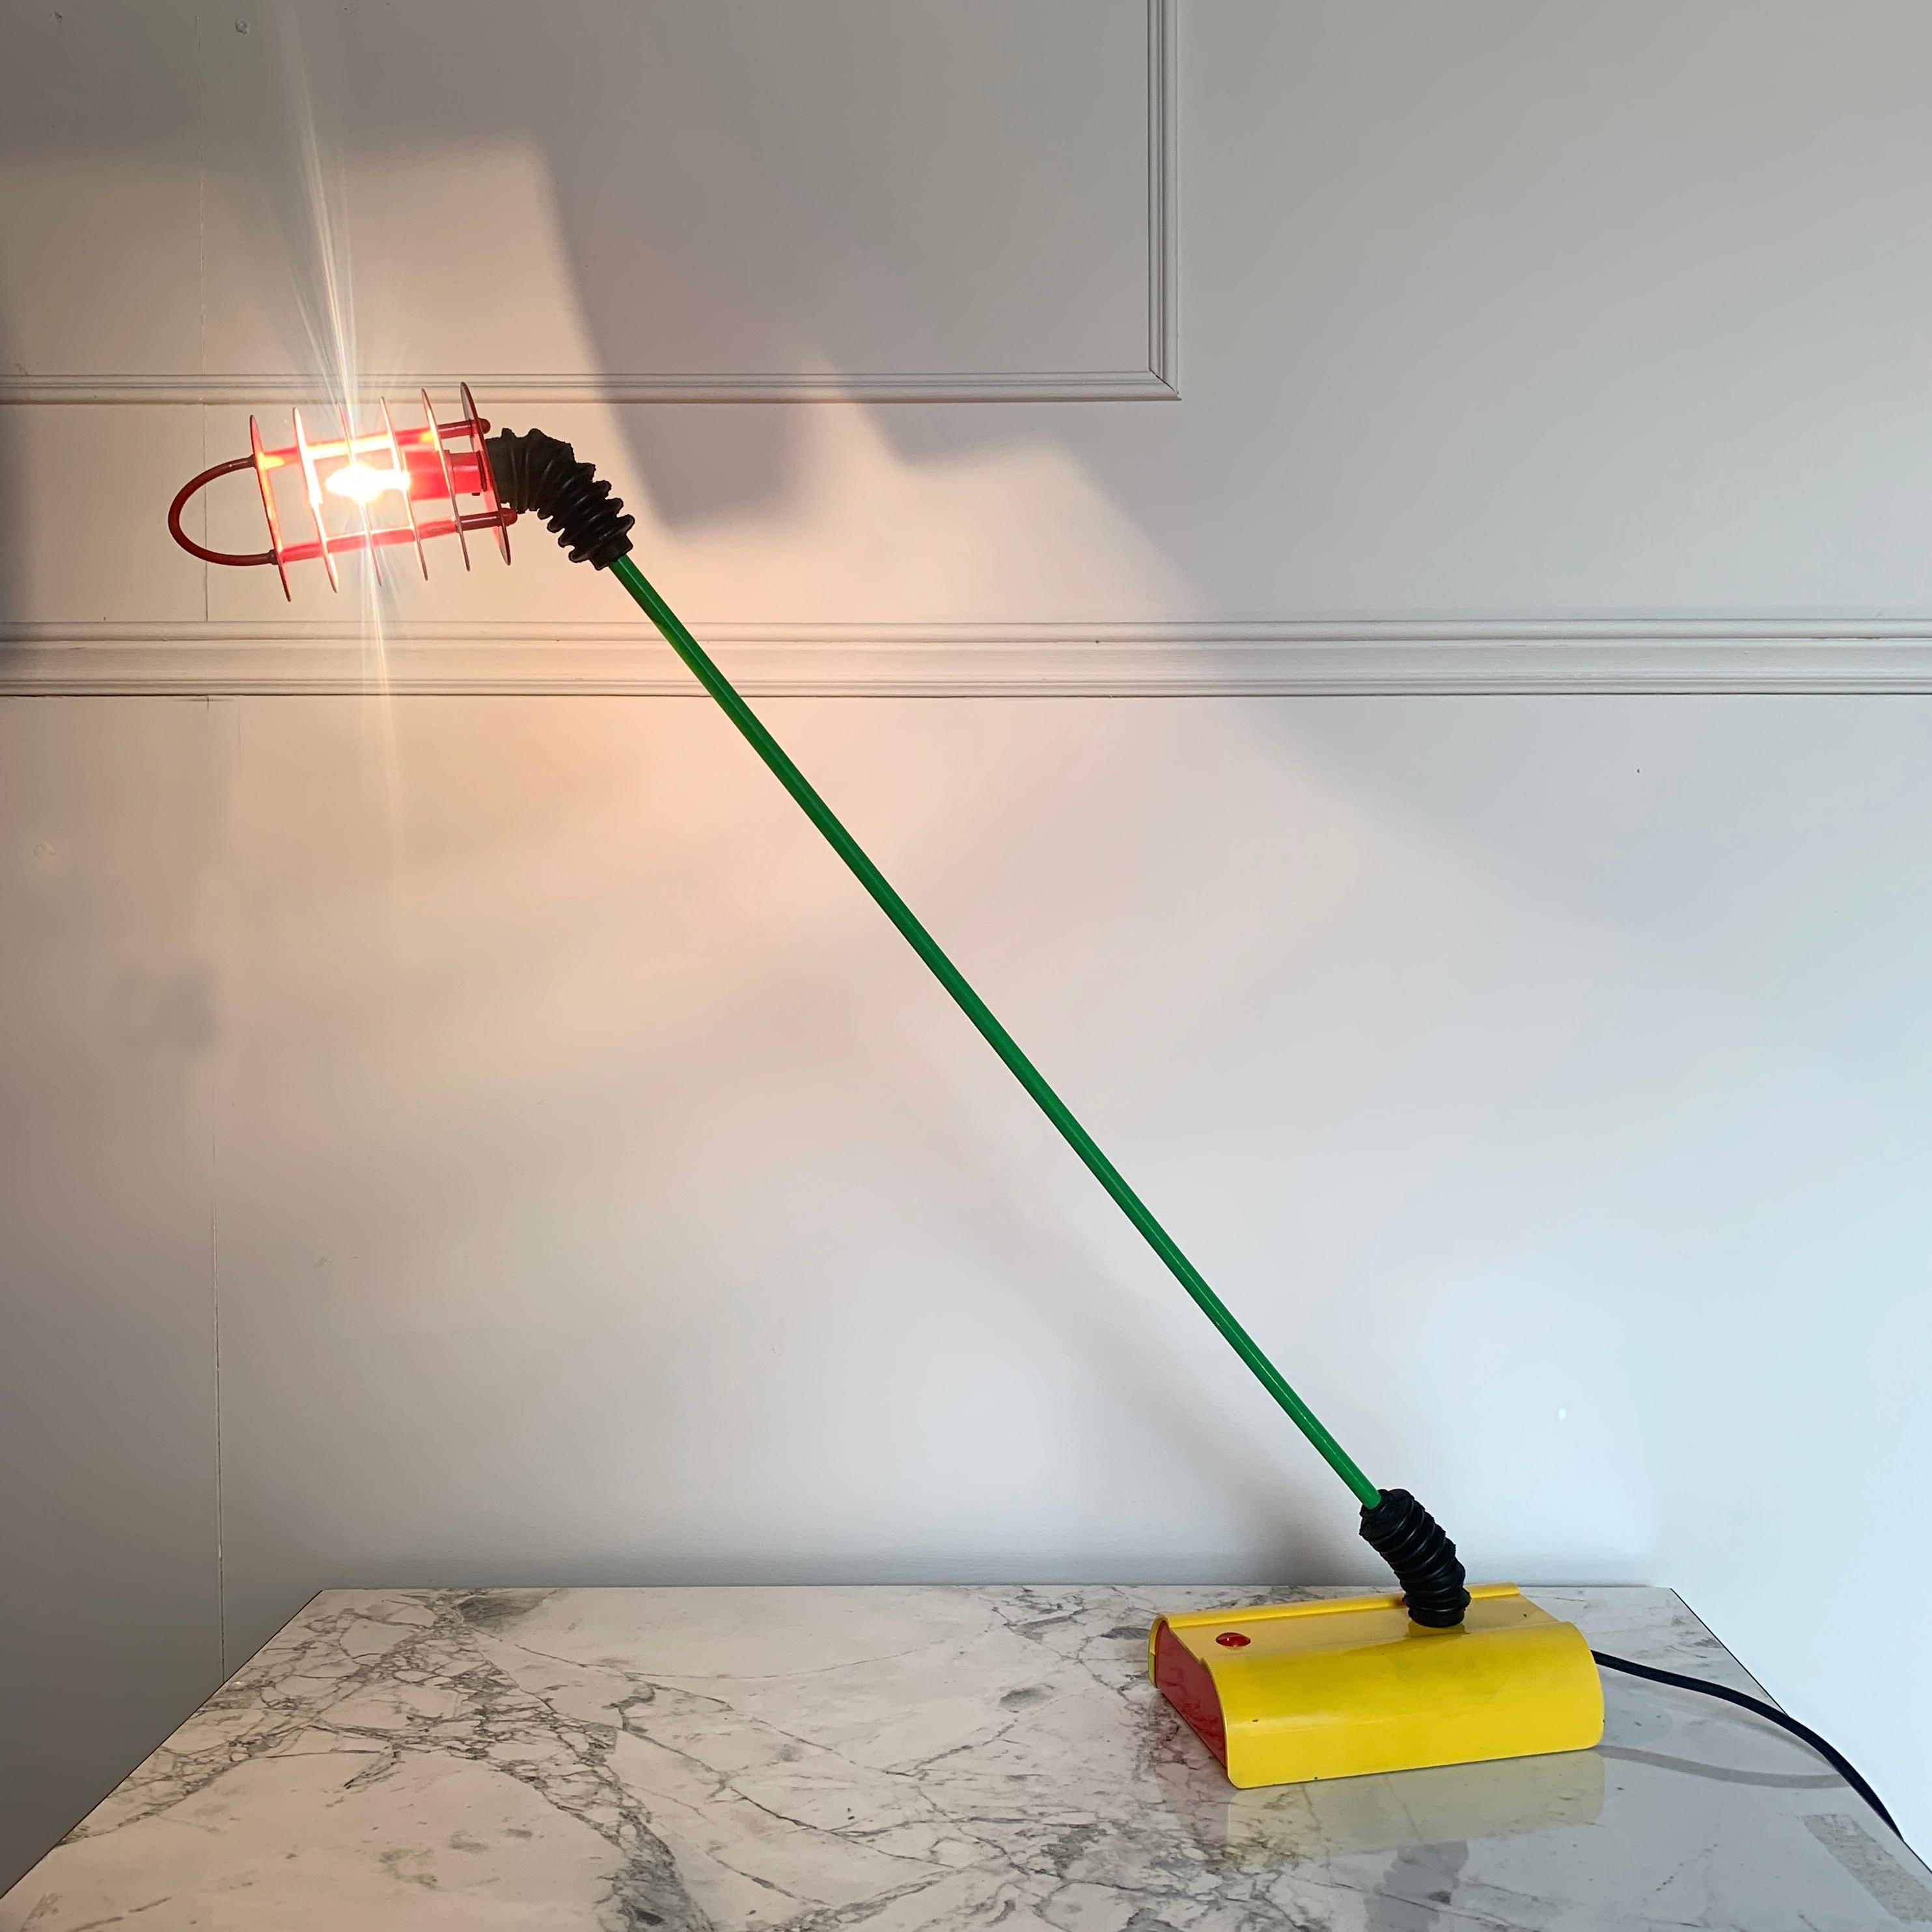 Rare Italian Sottsass style Memphis desk lamp, 1980s
Superb Memphis styling, colors and design lines
This lamp has an adjustable bright green arm with flexible rubber sleeves covering both ends
The rectangular yellow base has contrast primary red